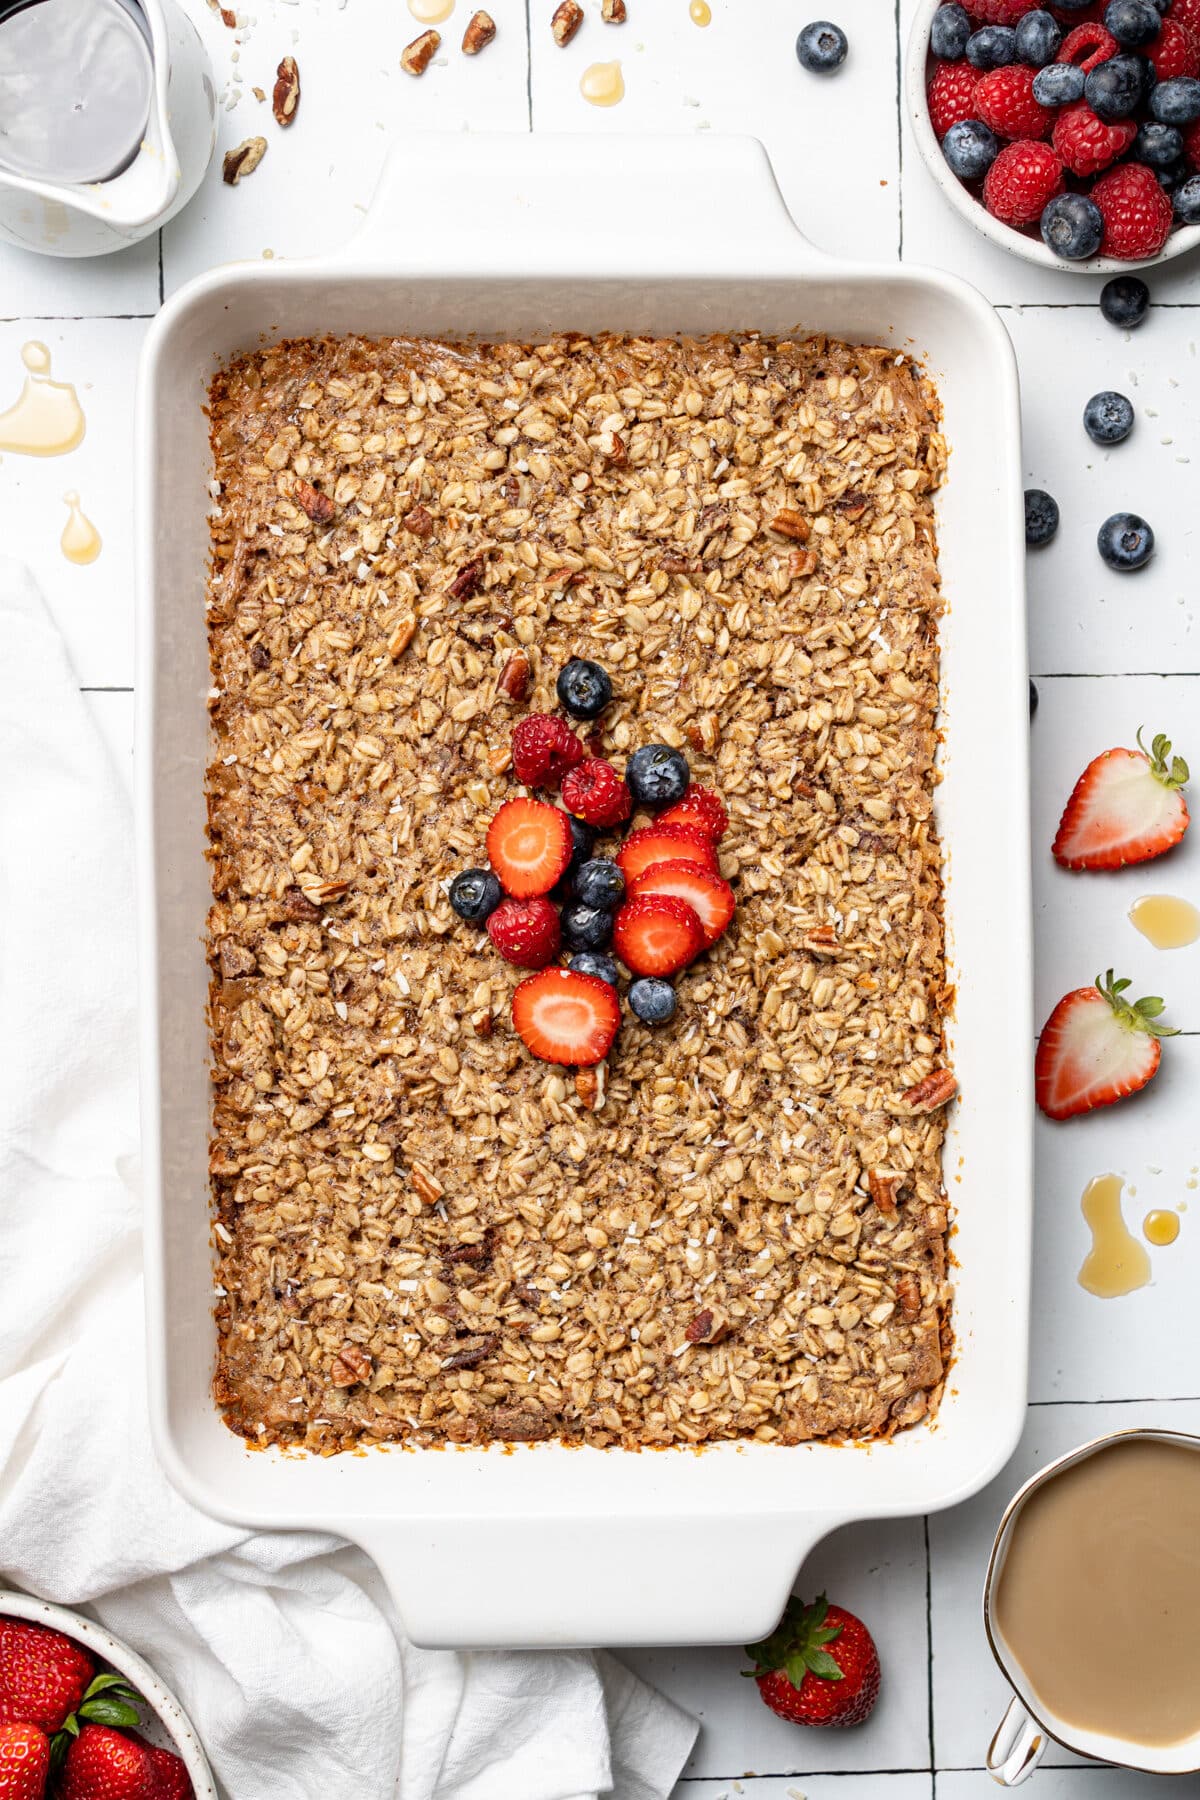 Casserole dish of baked oats topped with berries and pictured from above